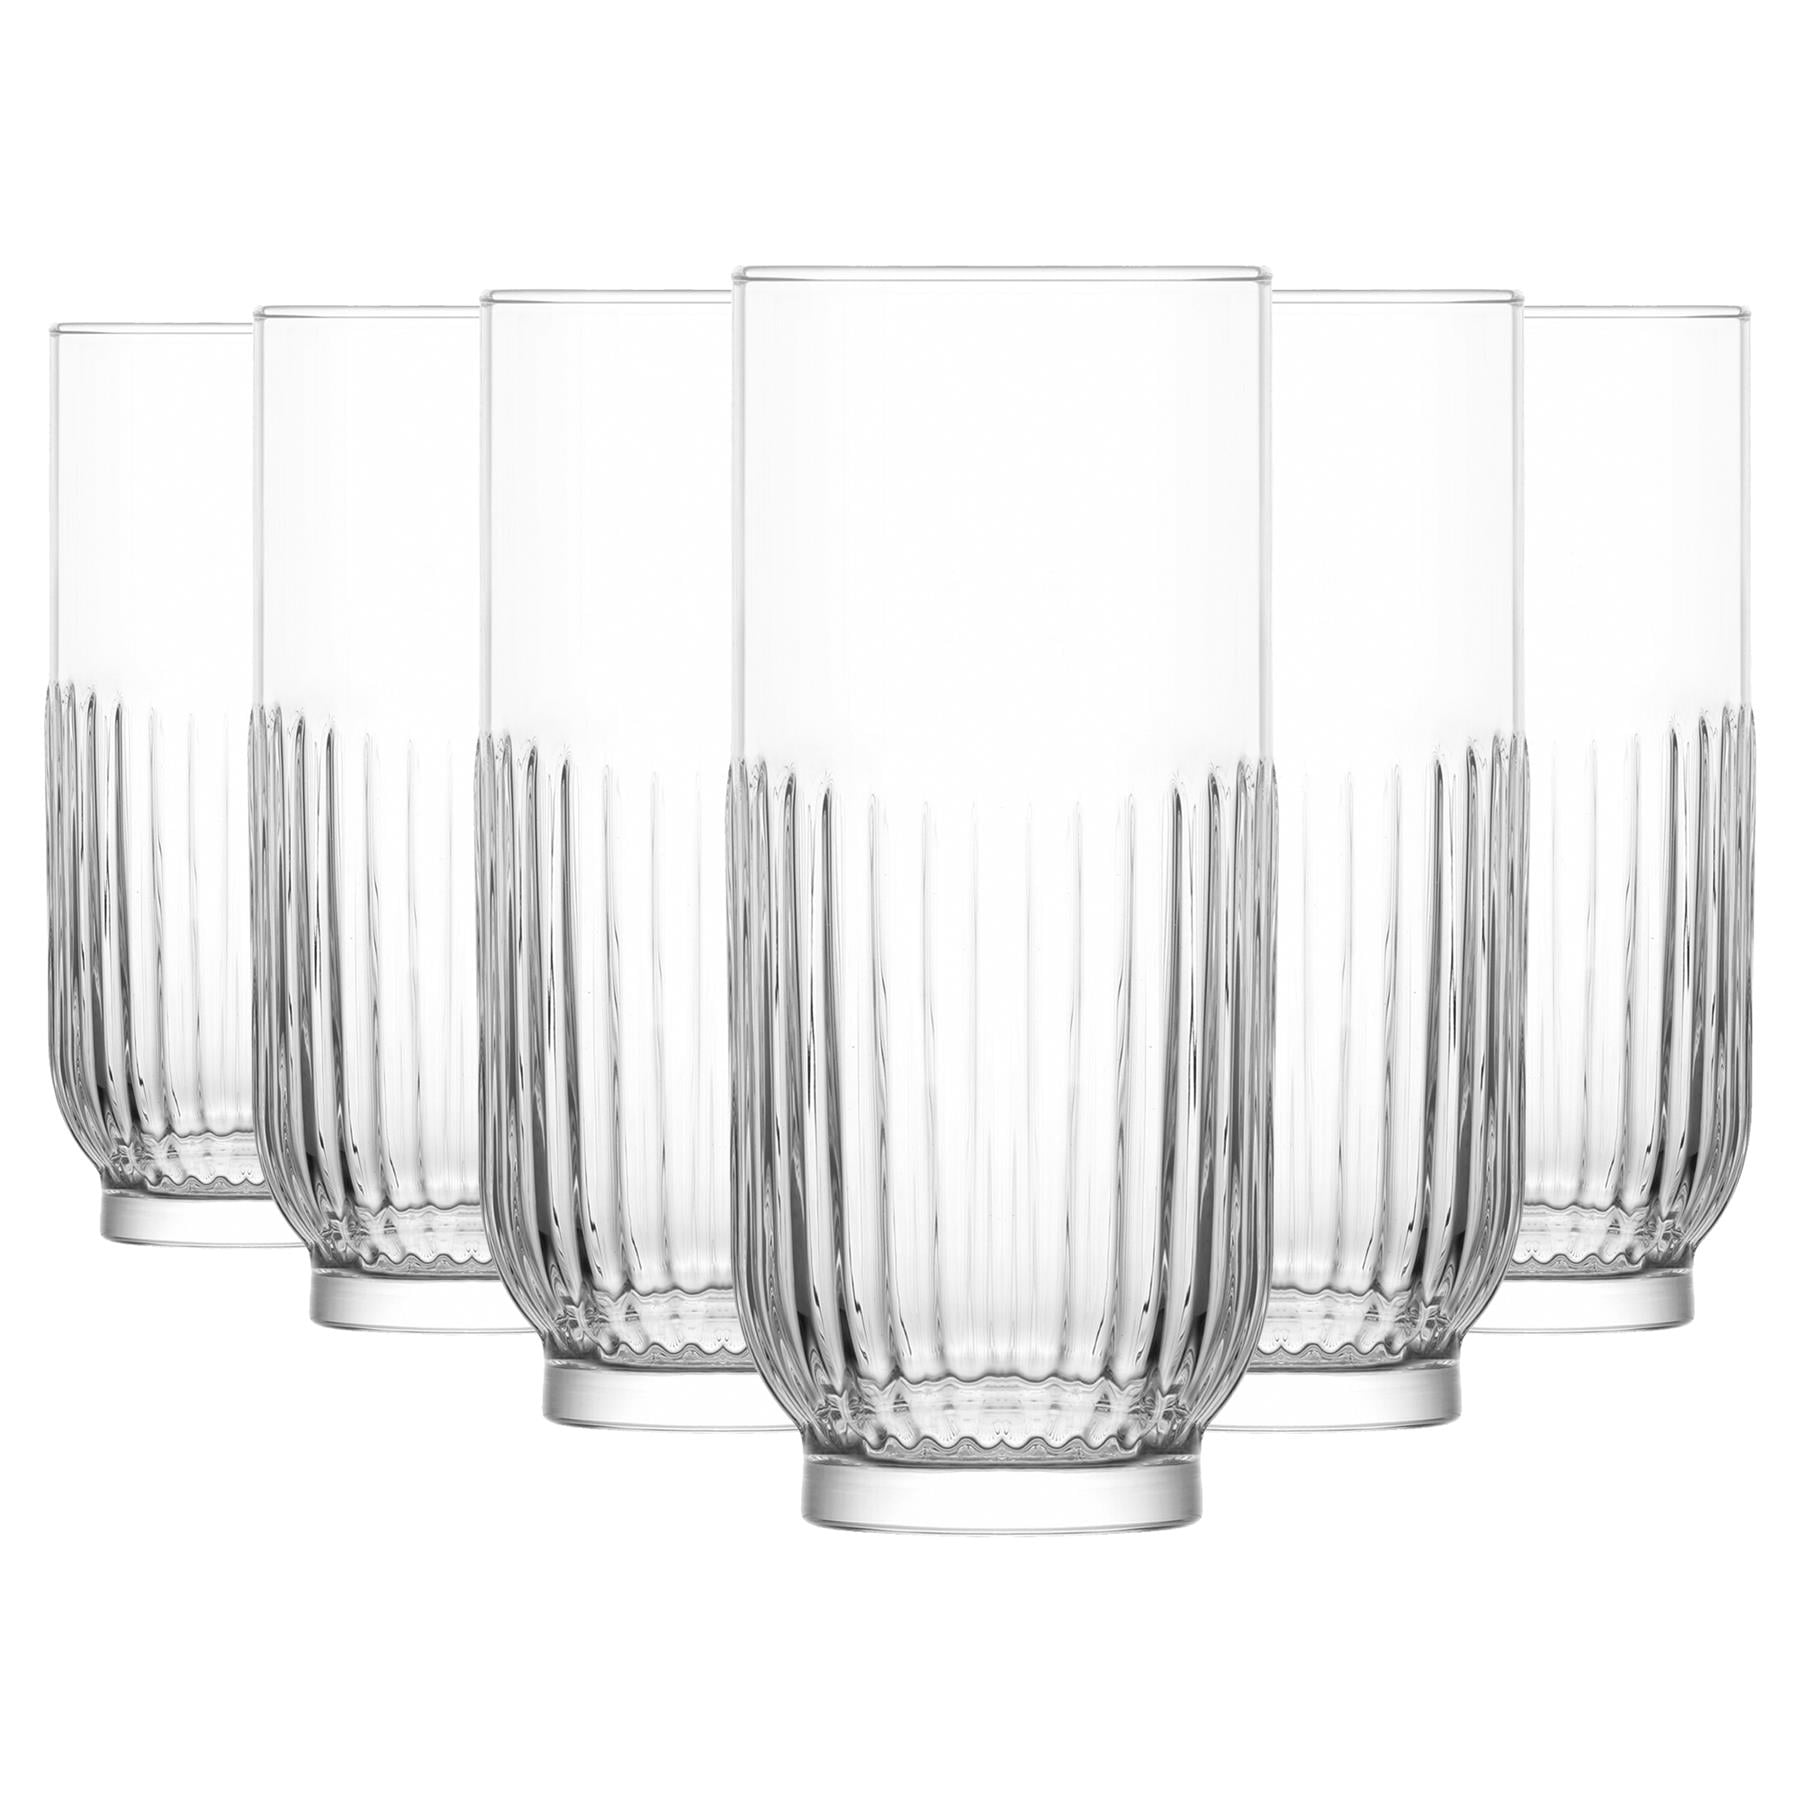 Silver Band Highball Collins Glasses Clear Set Of 6 Retro Bar Drinks